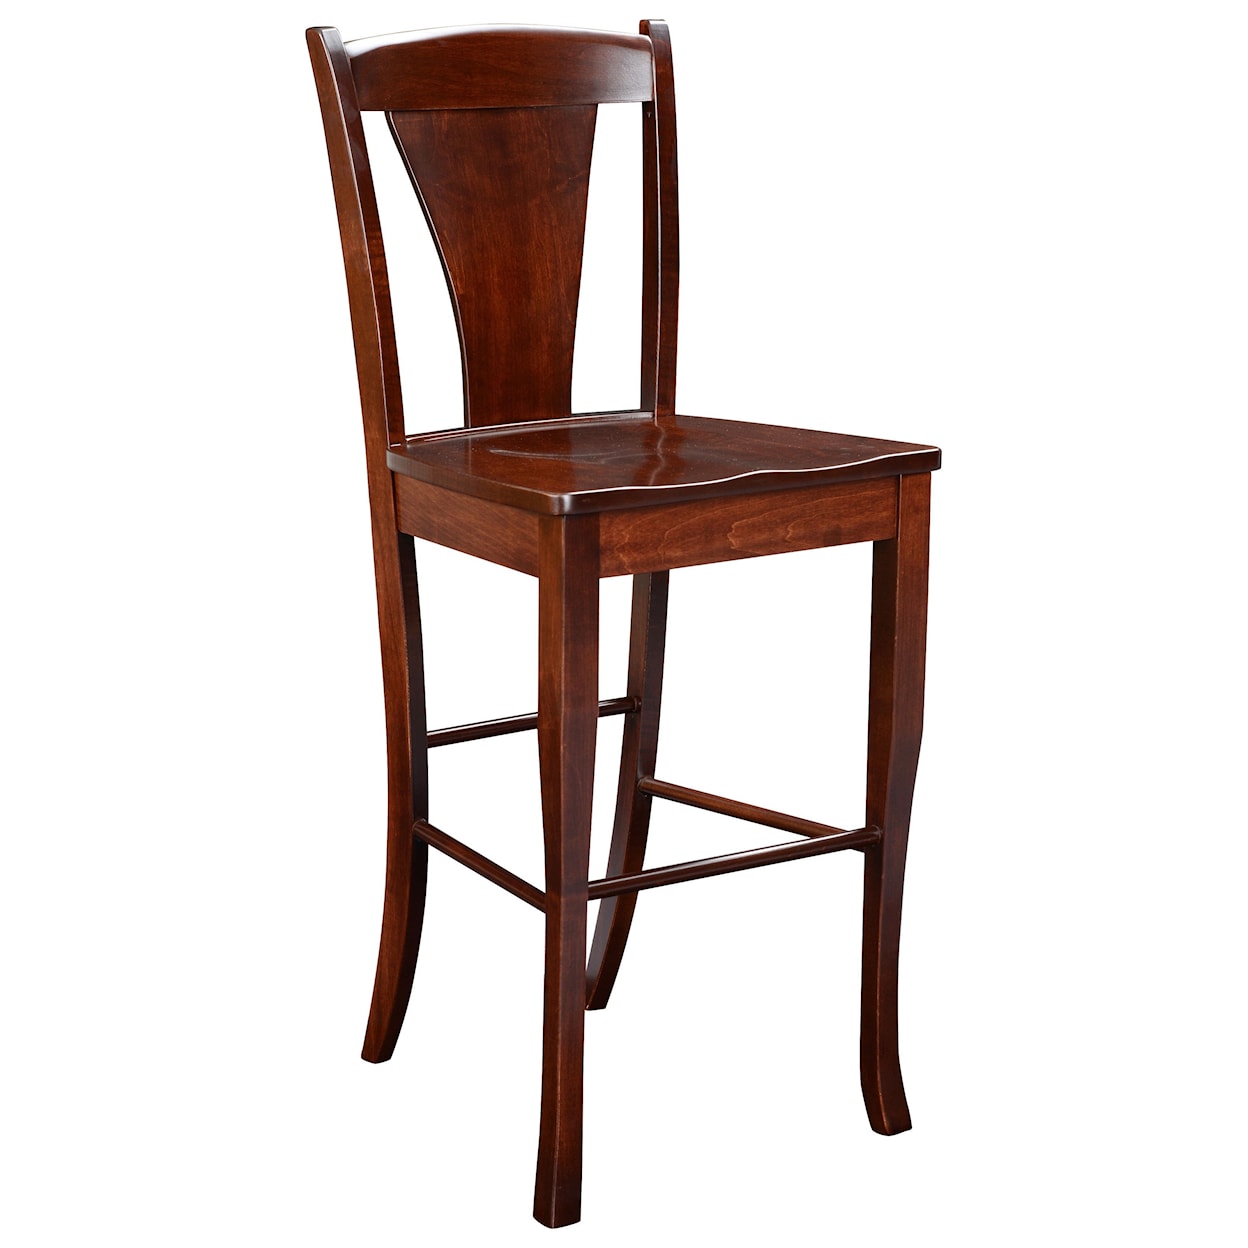 Wengerd Wood Products Woodville 30" Stationary Stool